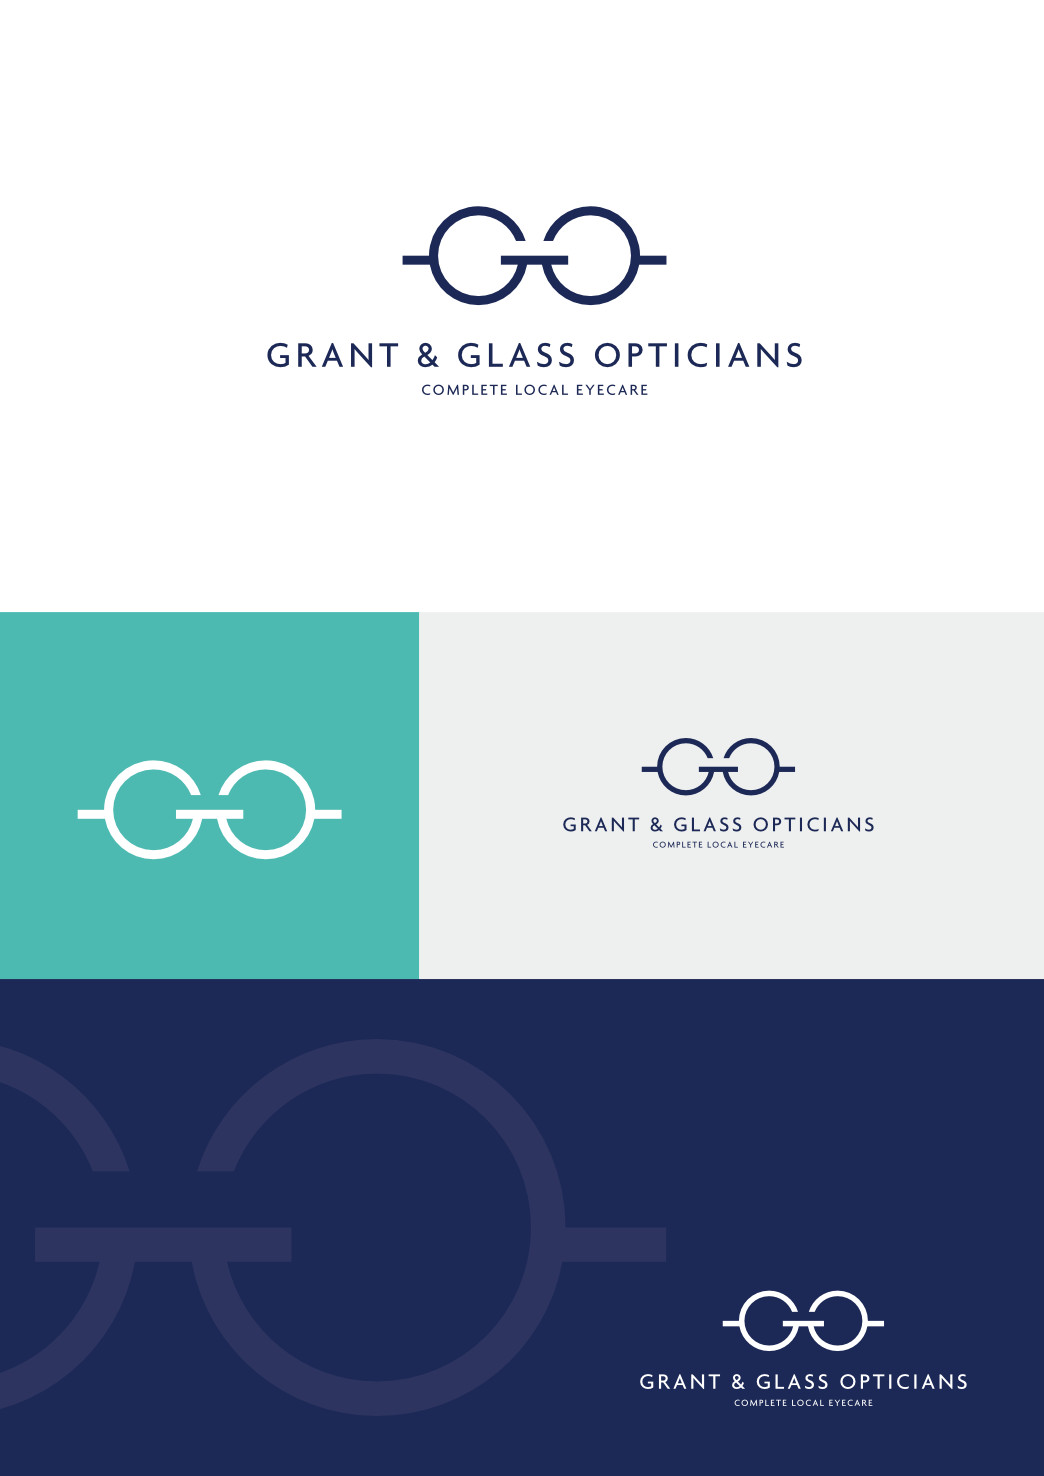 Grant and Glass Opticians